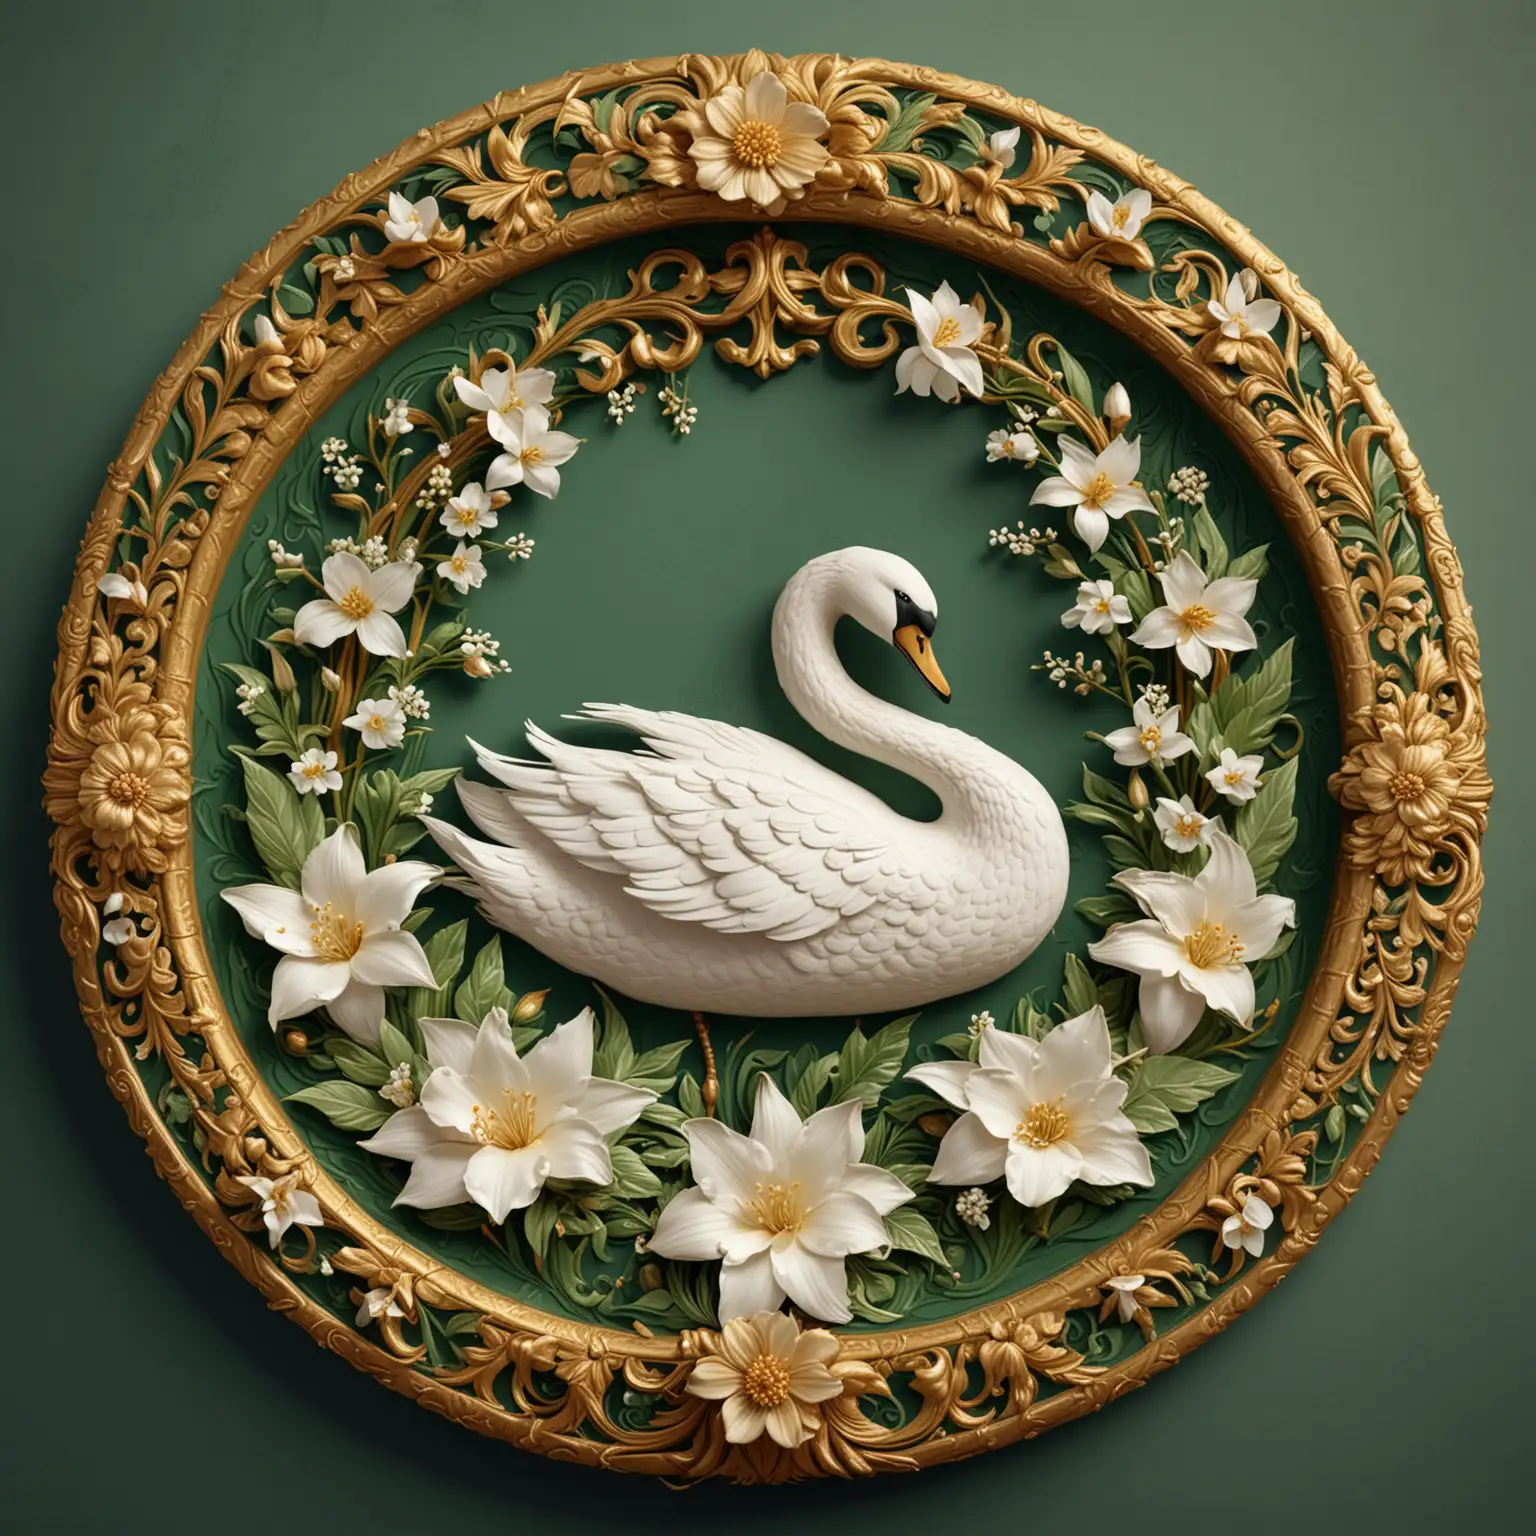 ancient logo in the form of a green circle surrounded by golden carvings, with a white swan and a bouquet of jasmine flowers in the center